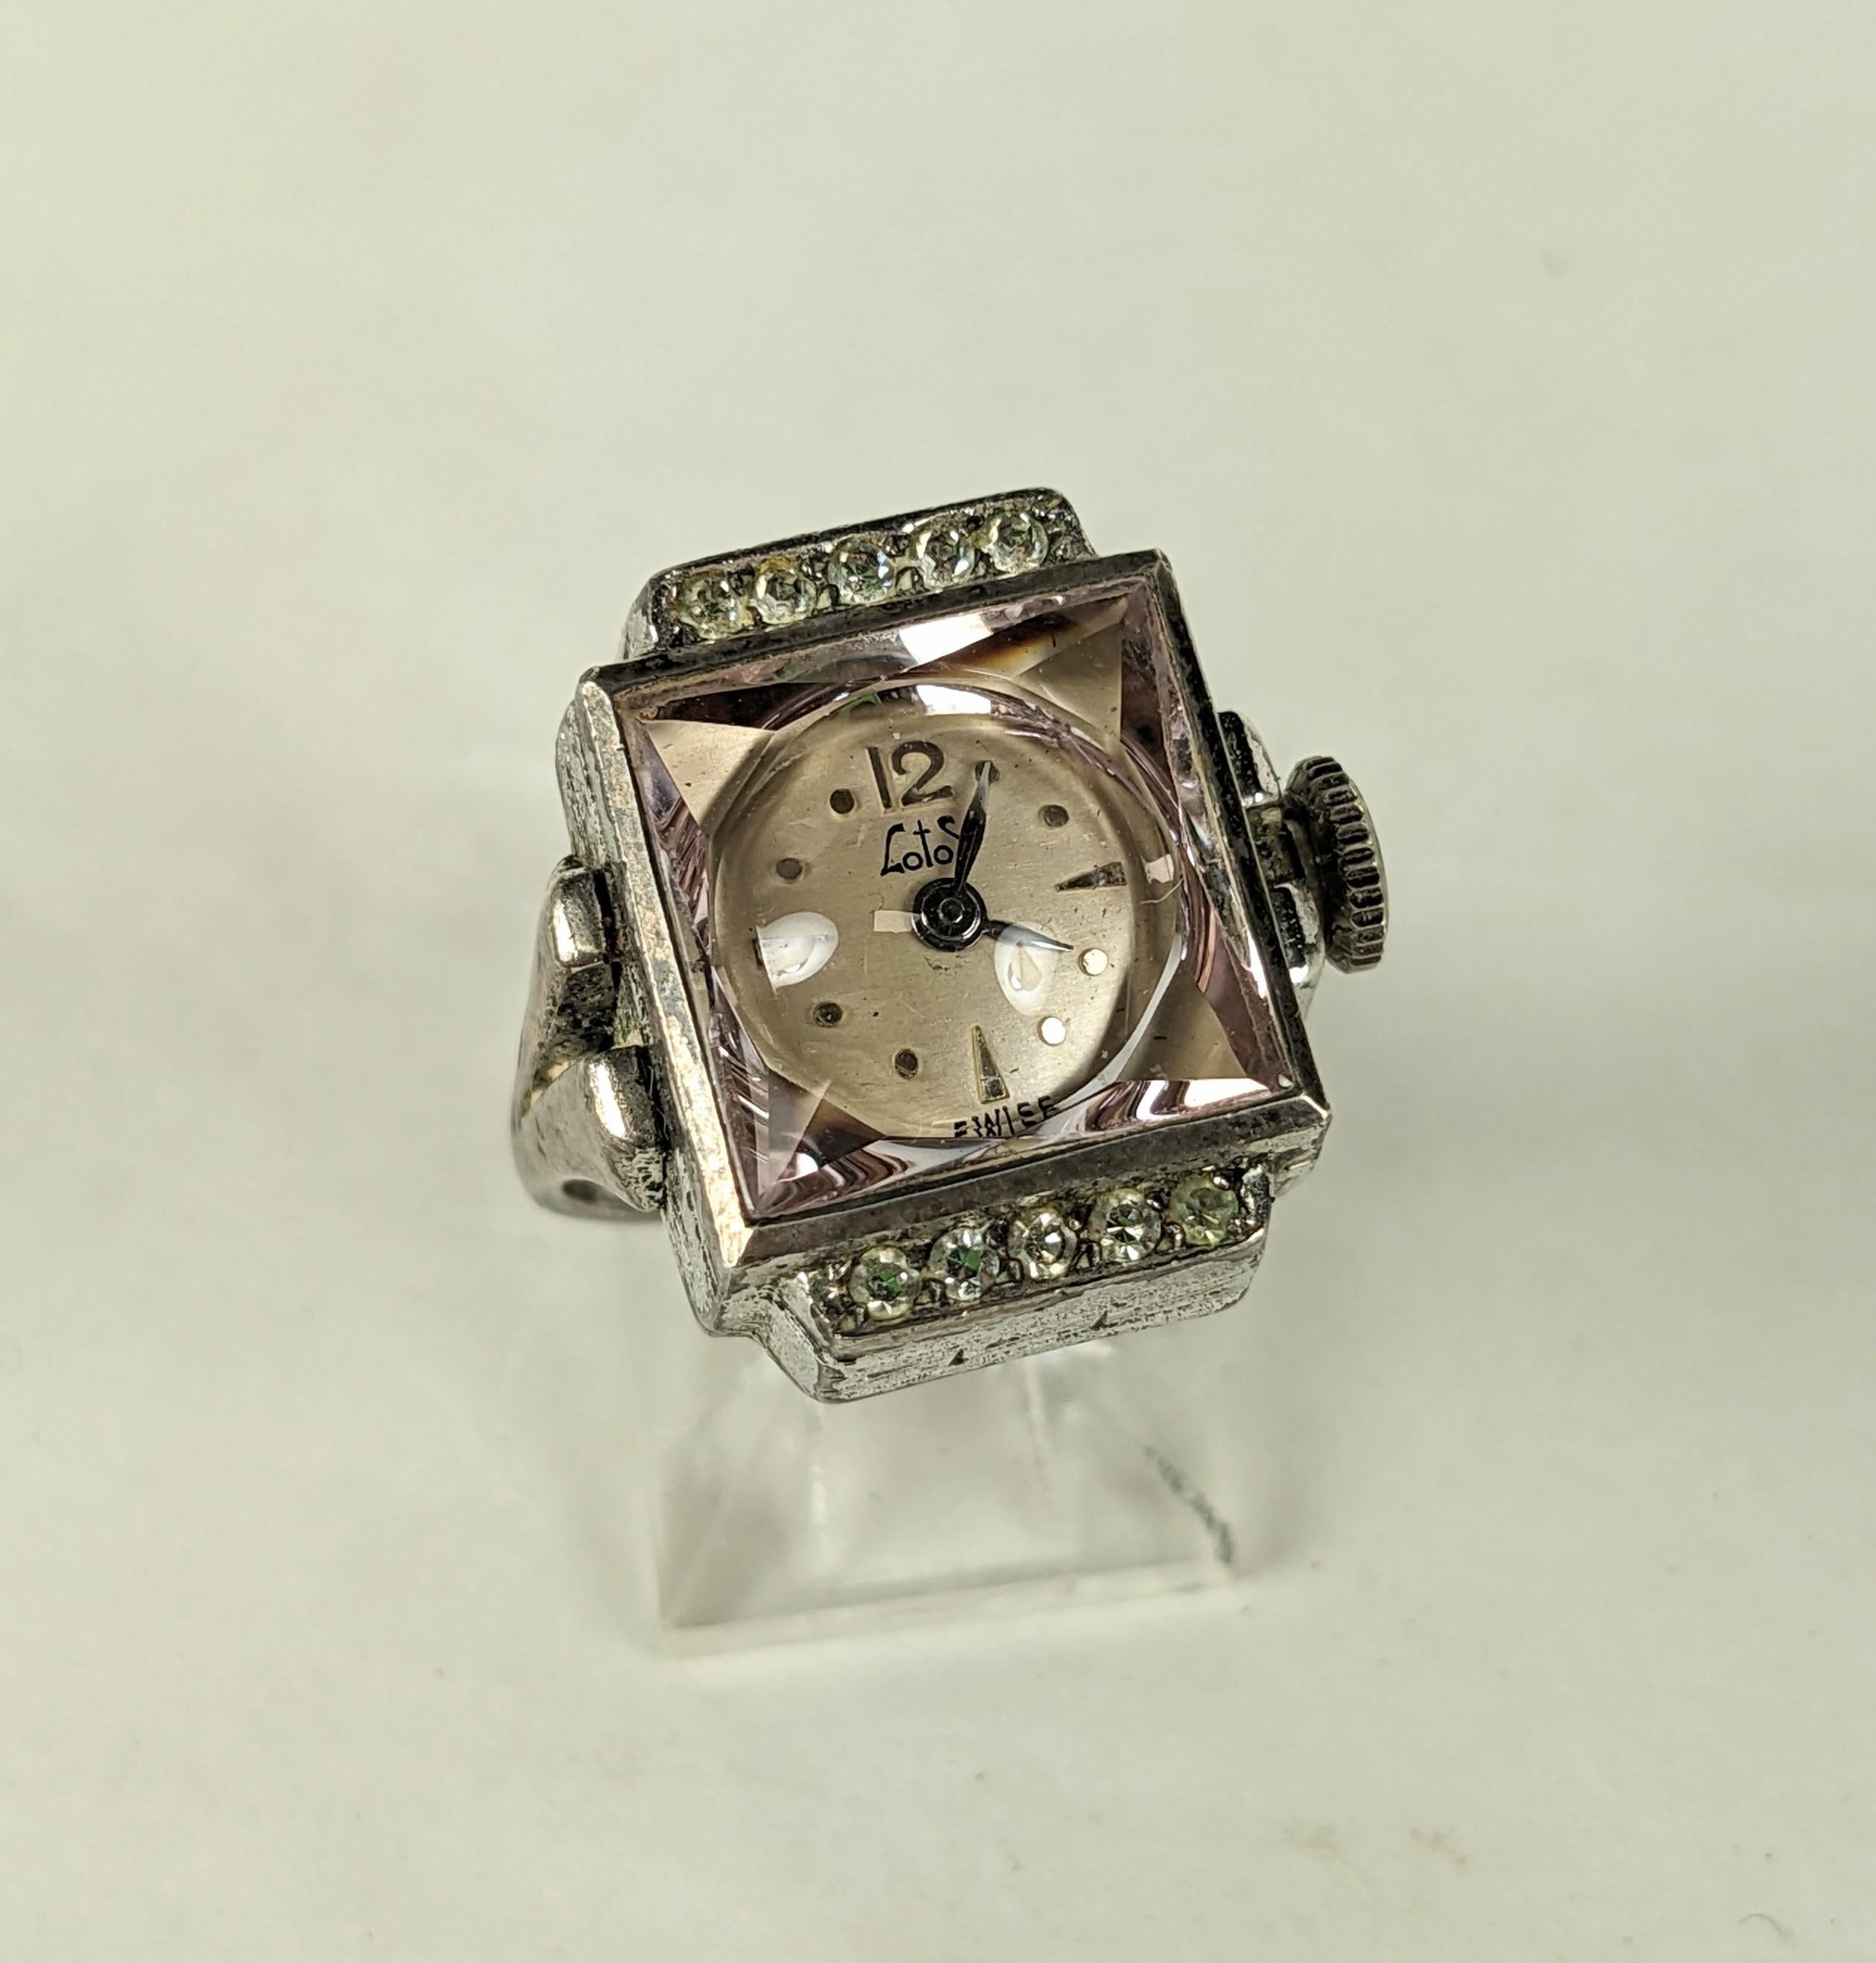 Charming Art Deco Watch Ring with a pink crystal. Set in sterling silver with pastes detailing with faceted pink crystal. Made by Lotos, Swiss made. Watch runs when wound, 1920's USA. Size 6. 